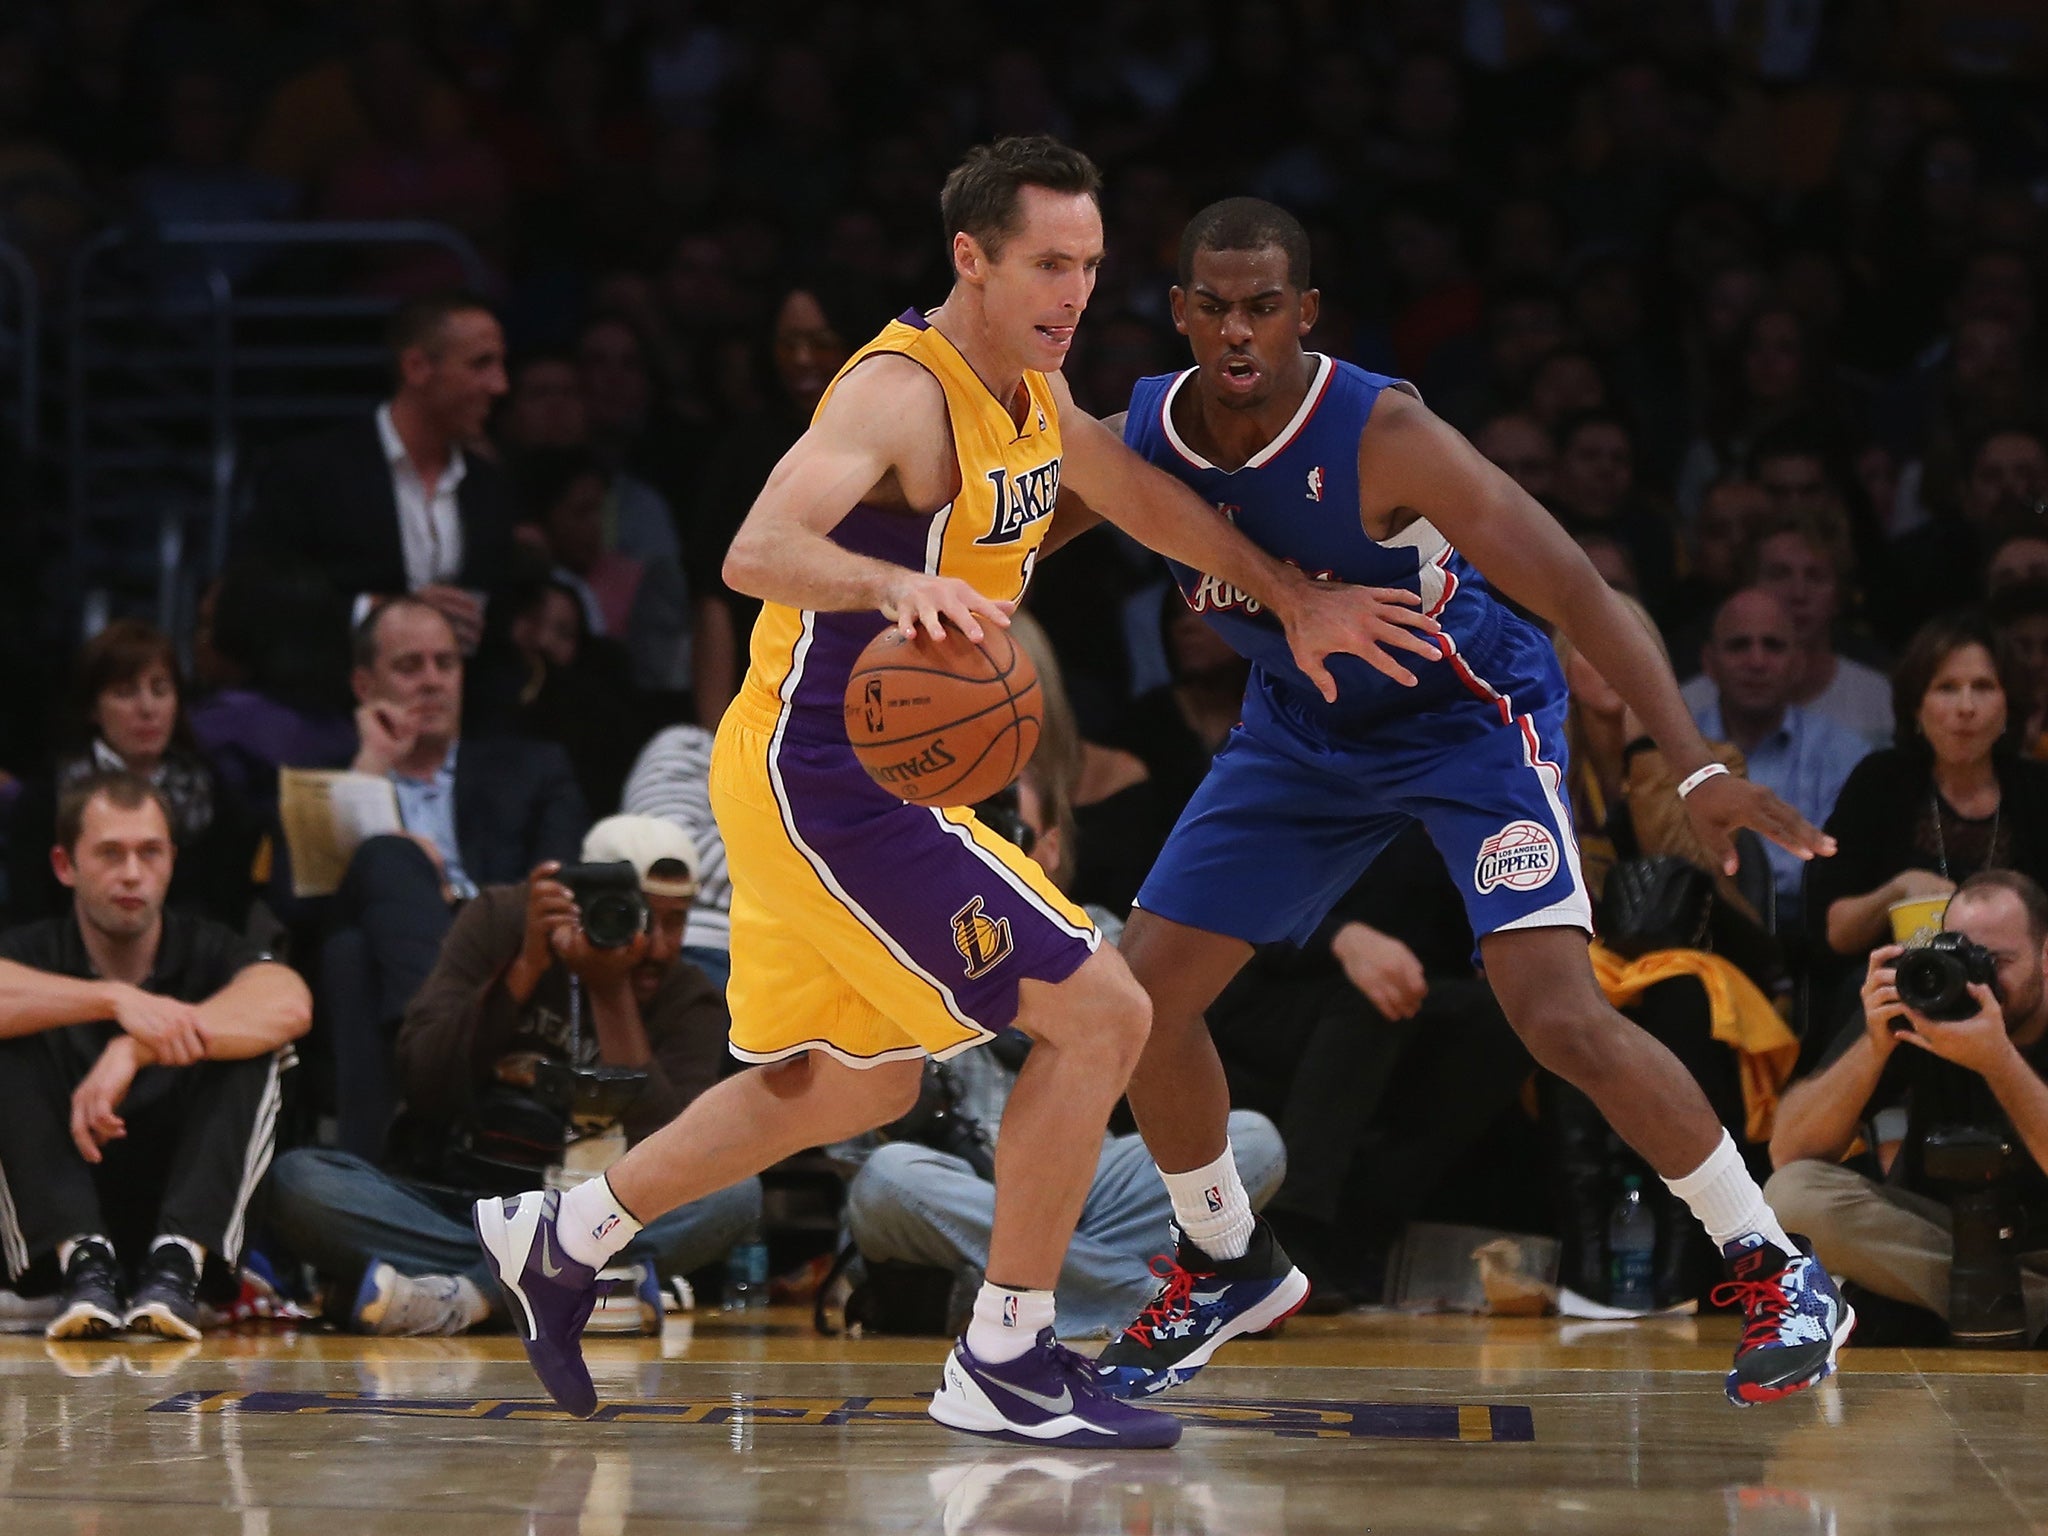 Steve Nash retires: Two-time MVP ends stellar career after long battle with  injuries, The Independent